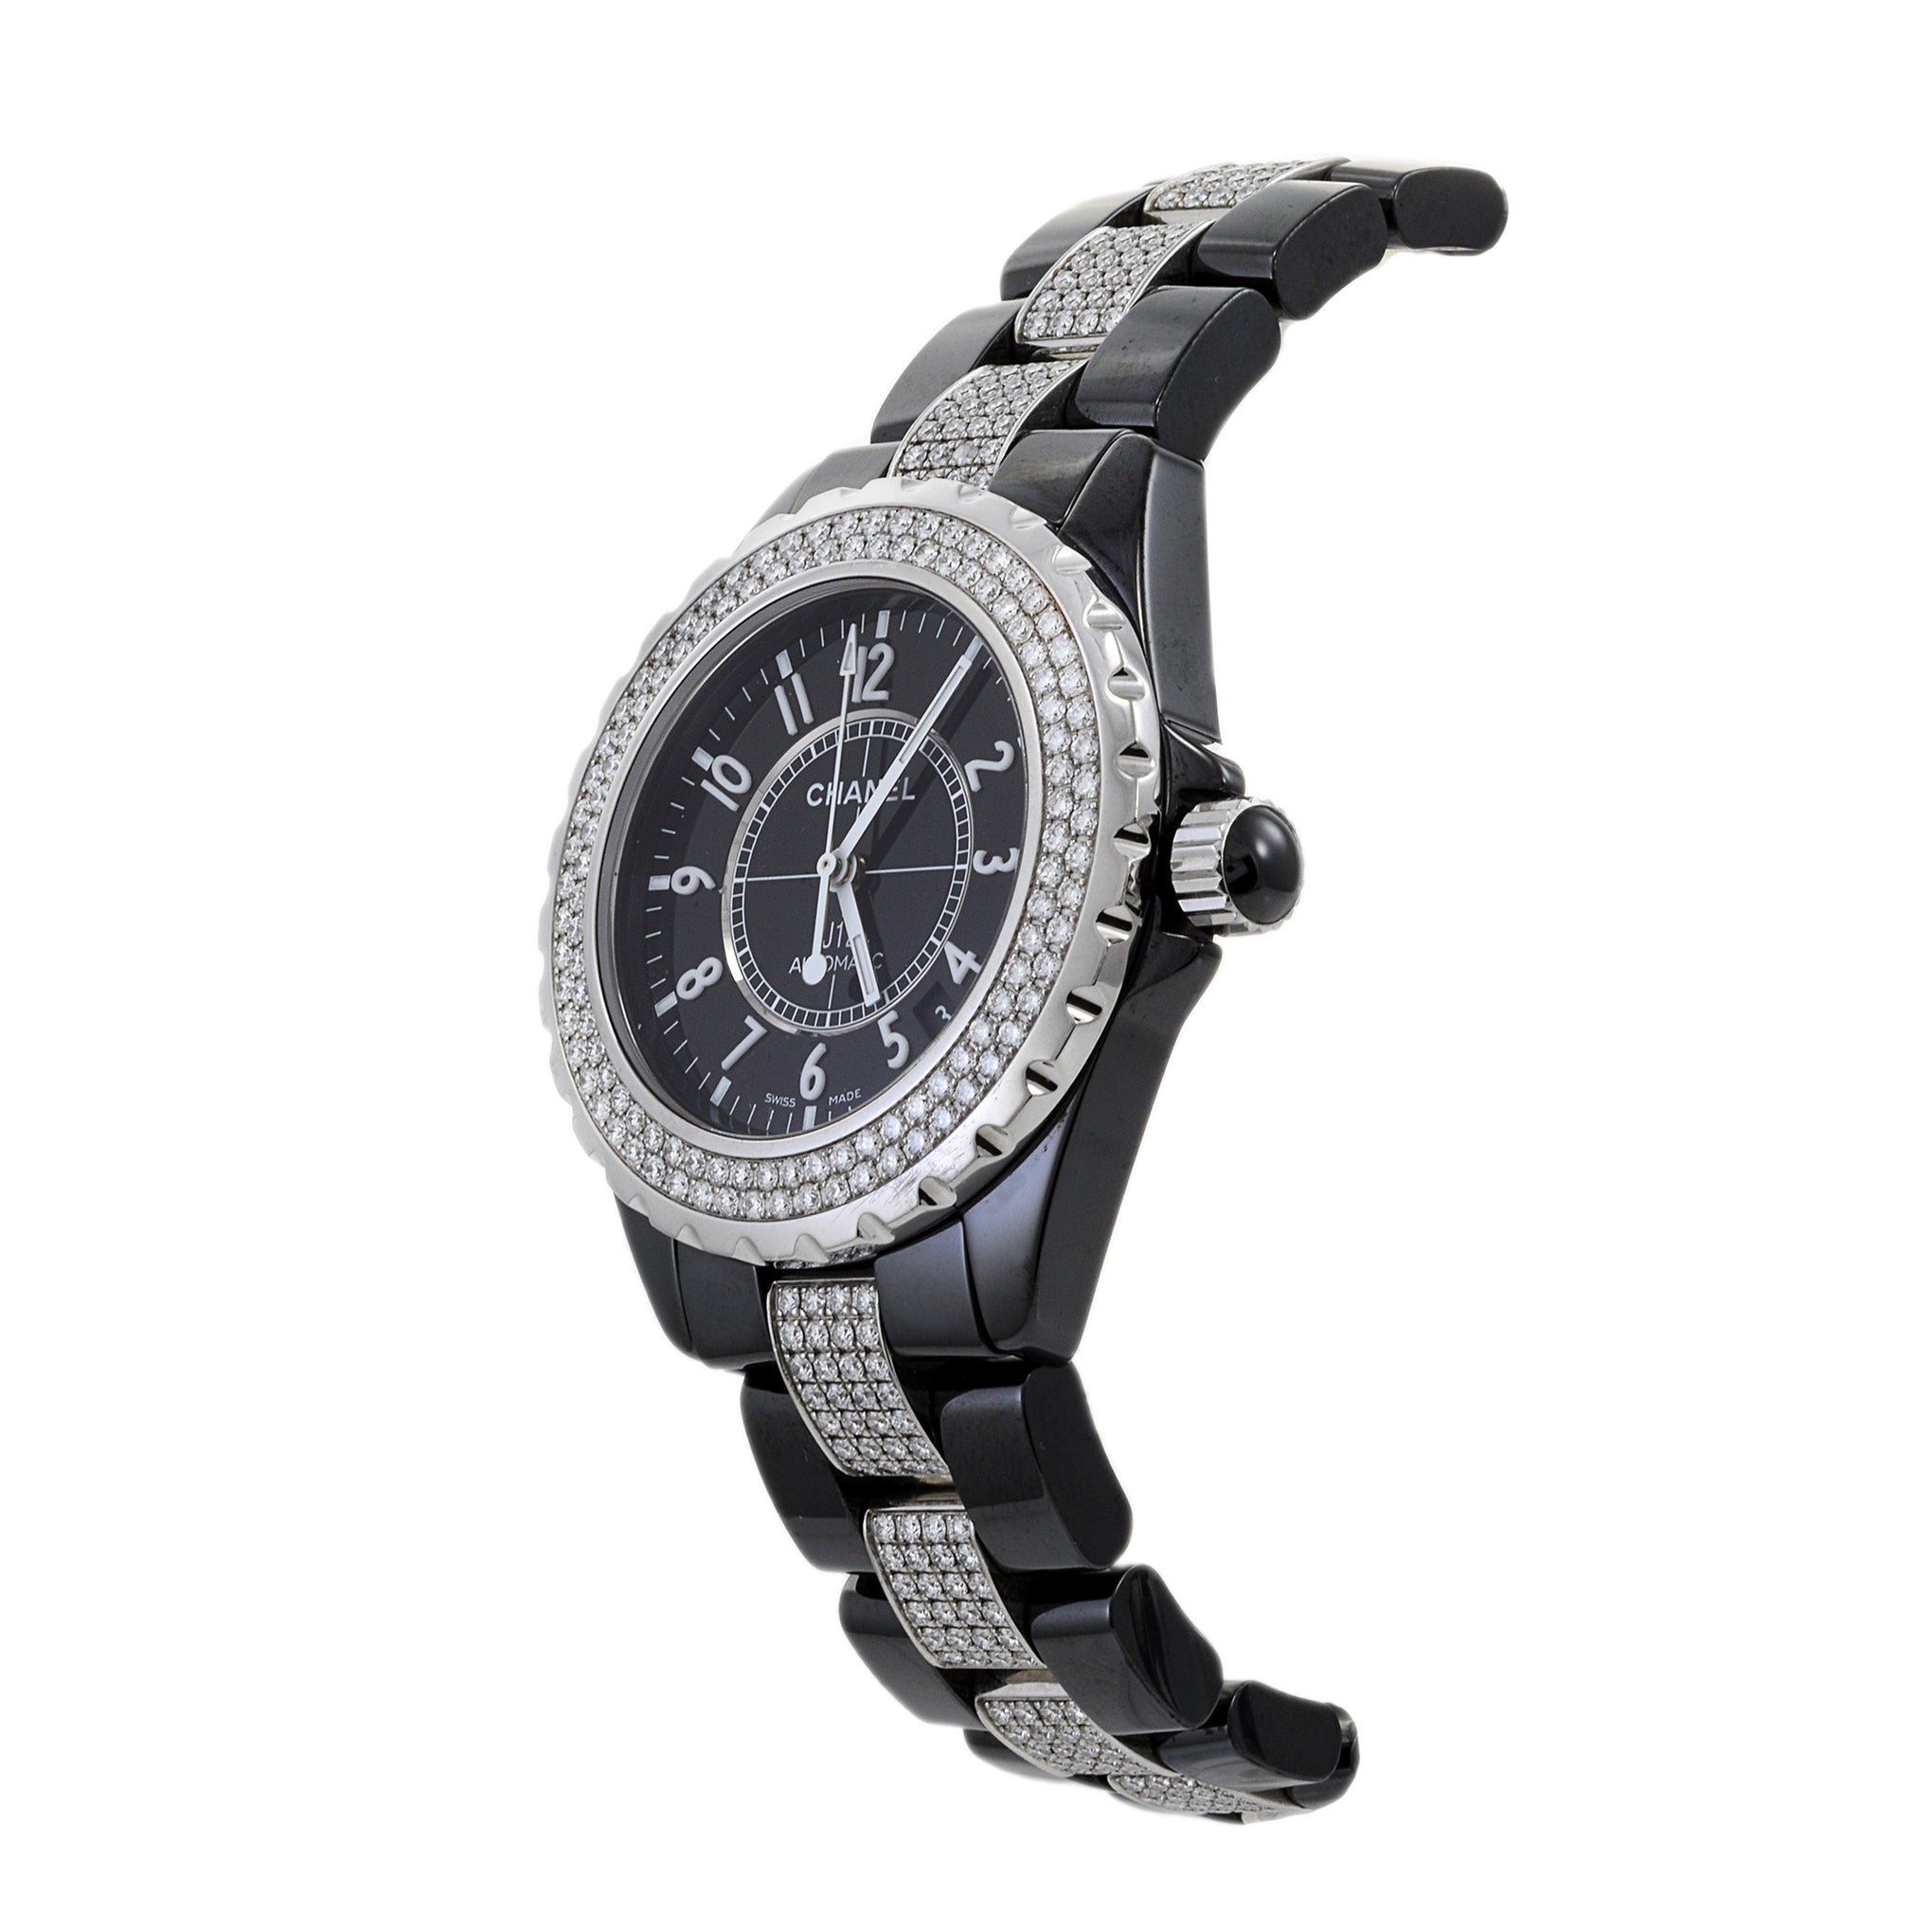 Chanel J12 Automatic Ceramic and Diamond Watch Reference H1339